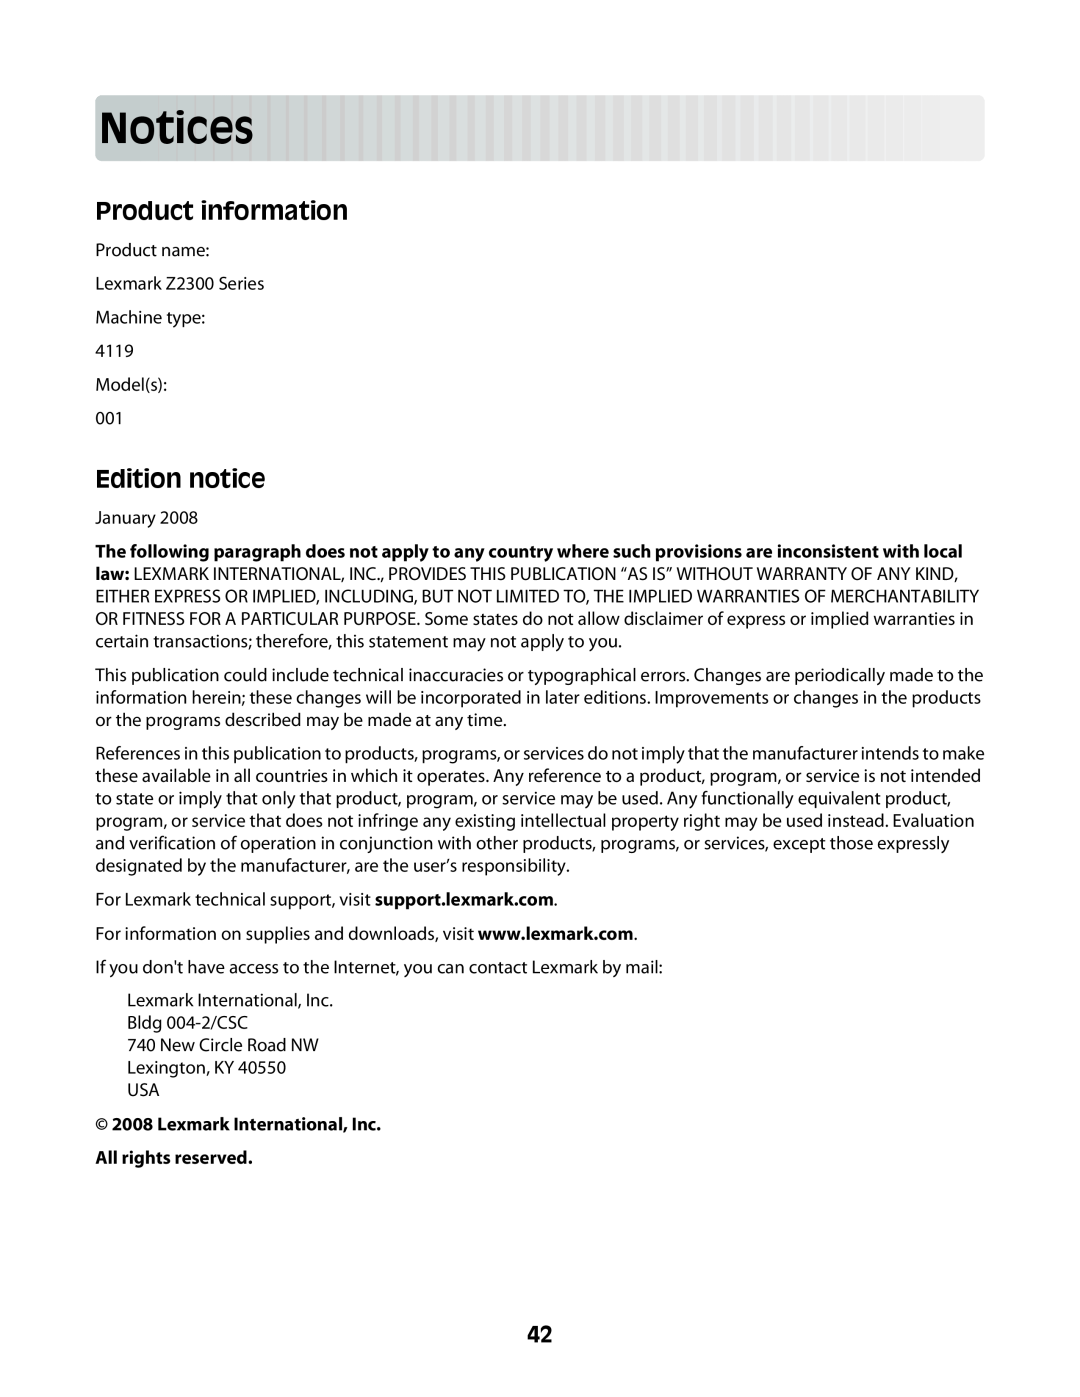 Lexmark Z2300 manual Notices, Product information, Edition notice 